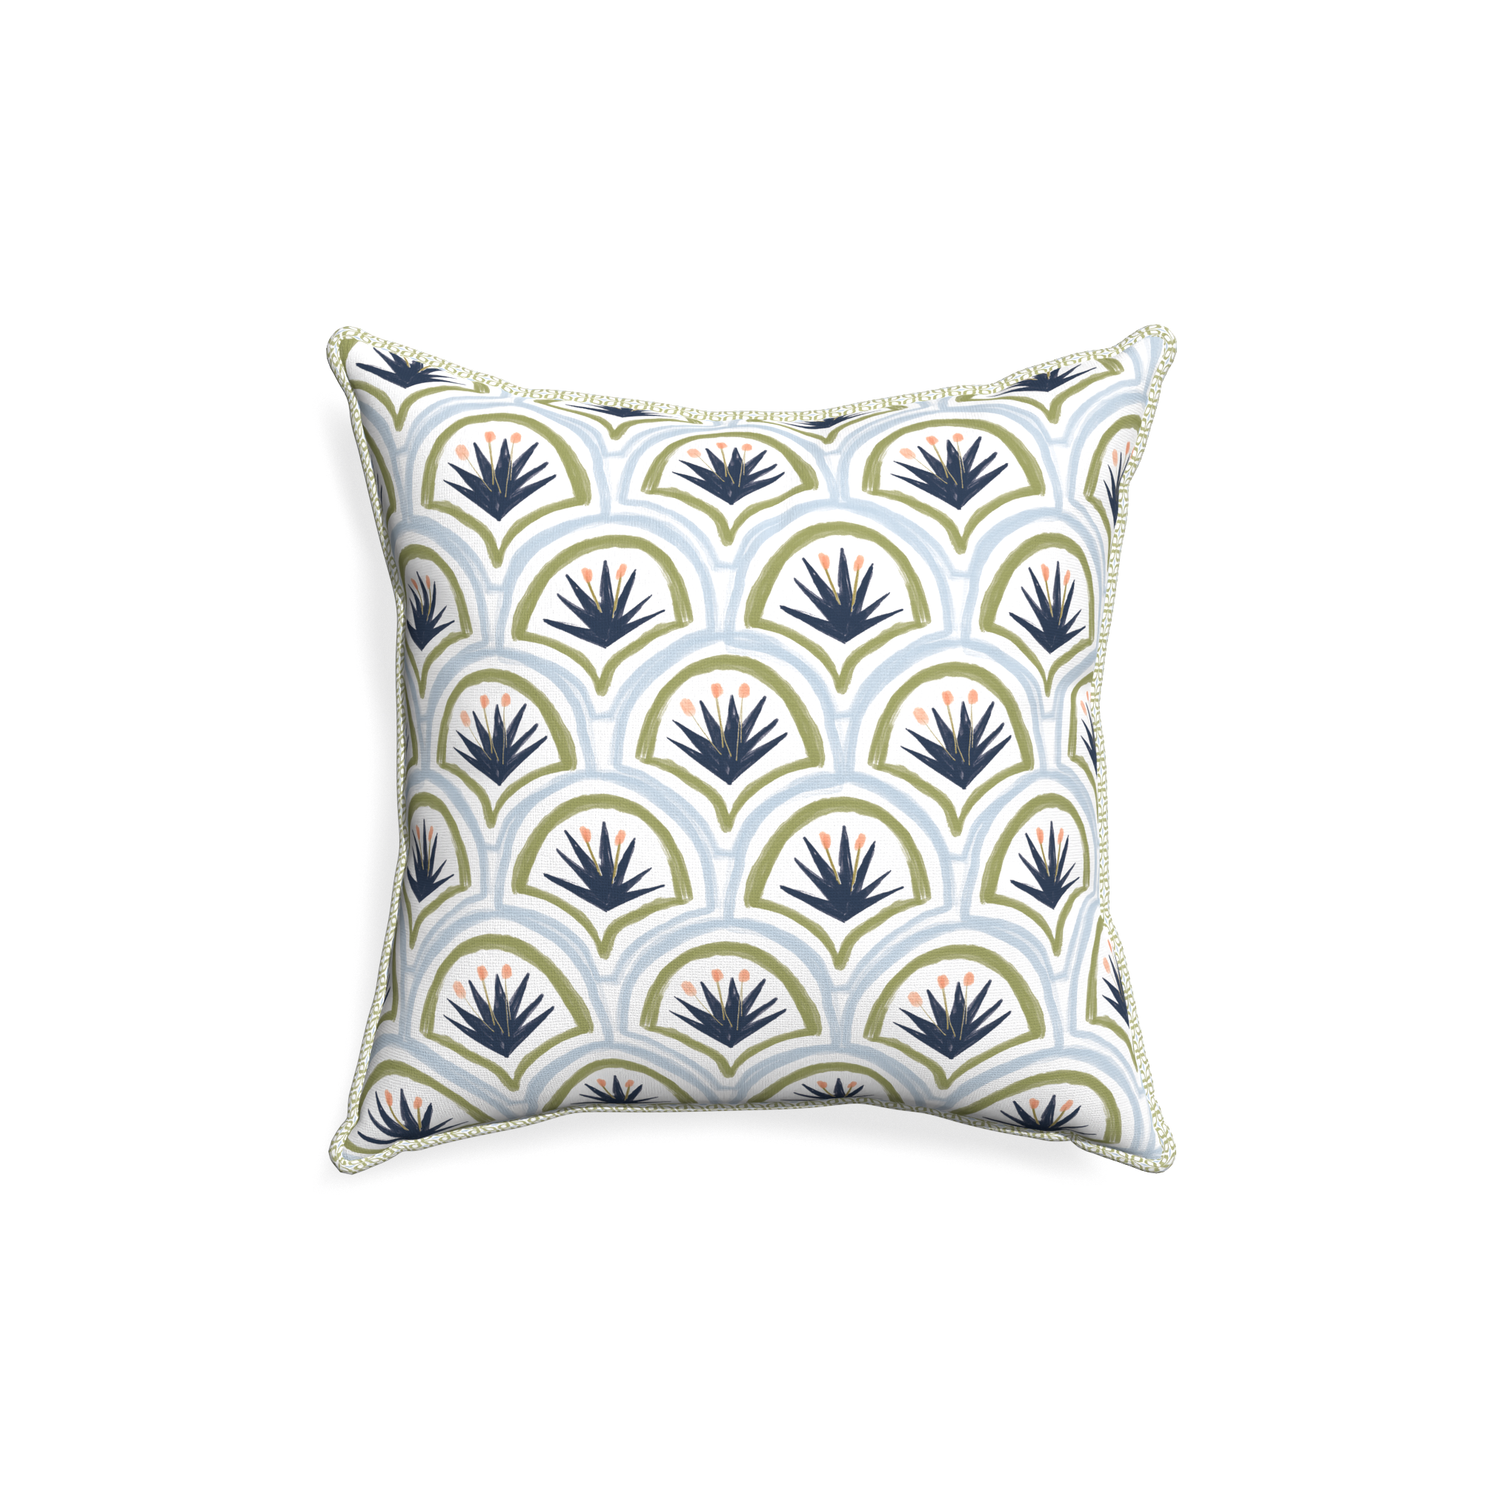 18-square thatcher midnight custom art deco palm patternpillow with l piping on white background